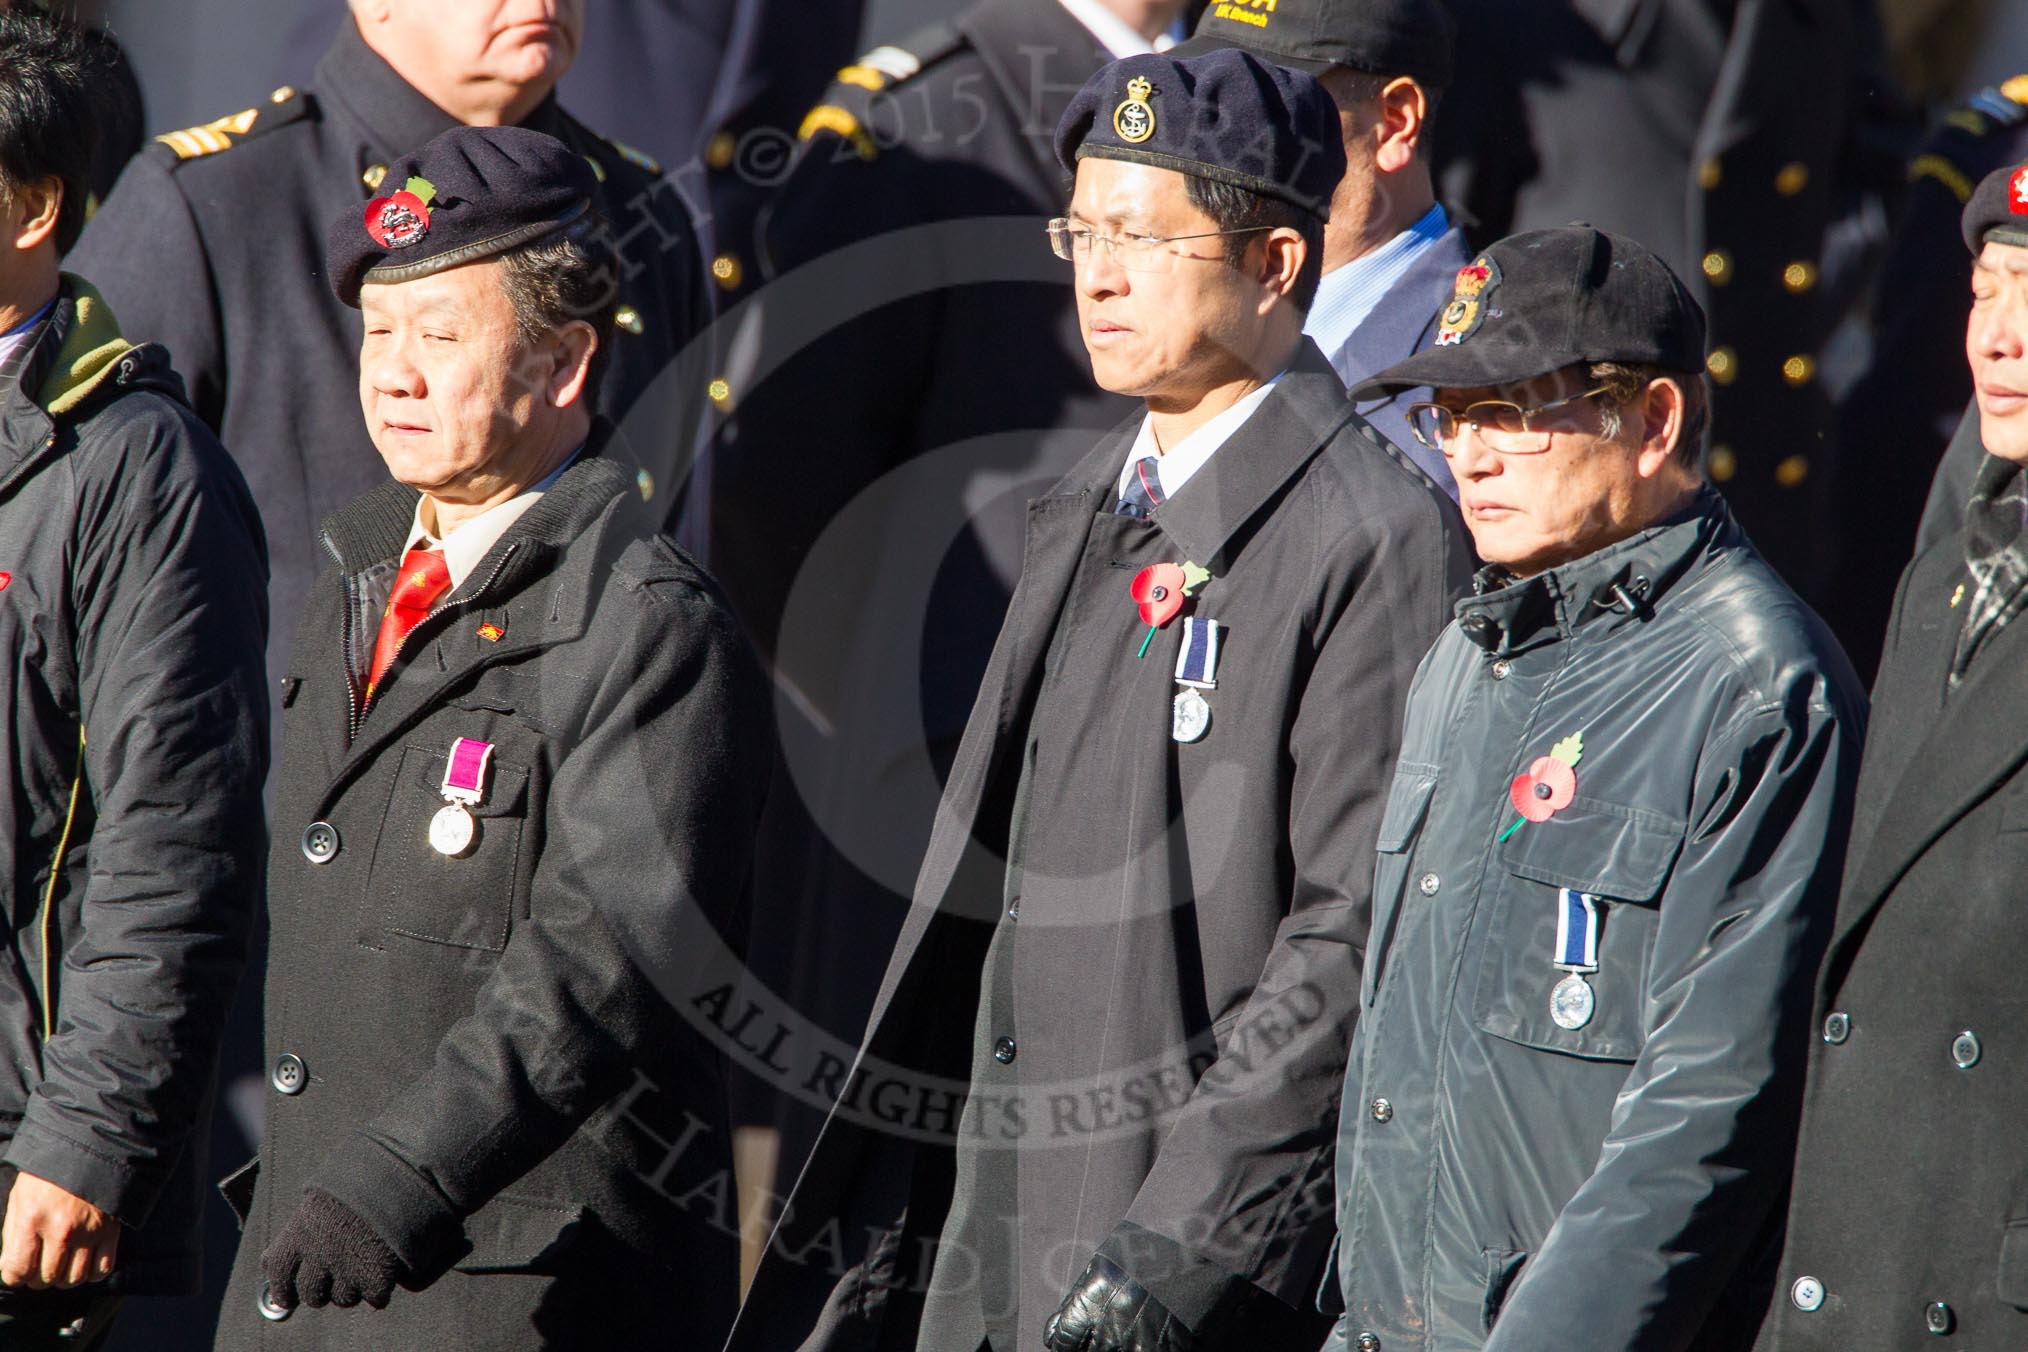 Remembrance Sunday Cenotaph March Past 2013: D9 - Hong Kong Ex-Servicemen's Association (UK Branch)..
Press stand opposite the Foreign Office building, Whitehall, London SW1,
London,
Greater London,
United Kingdom,
on 10 November 2013 at 11:39, image #76